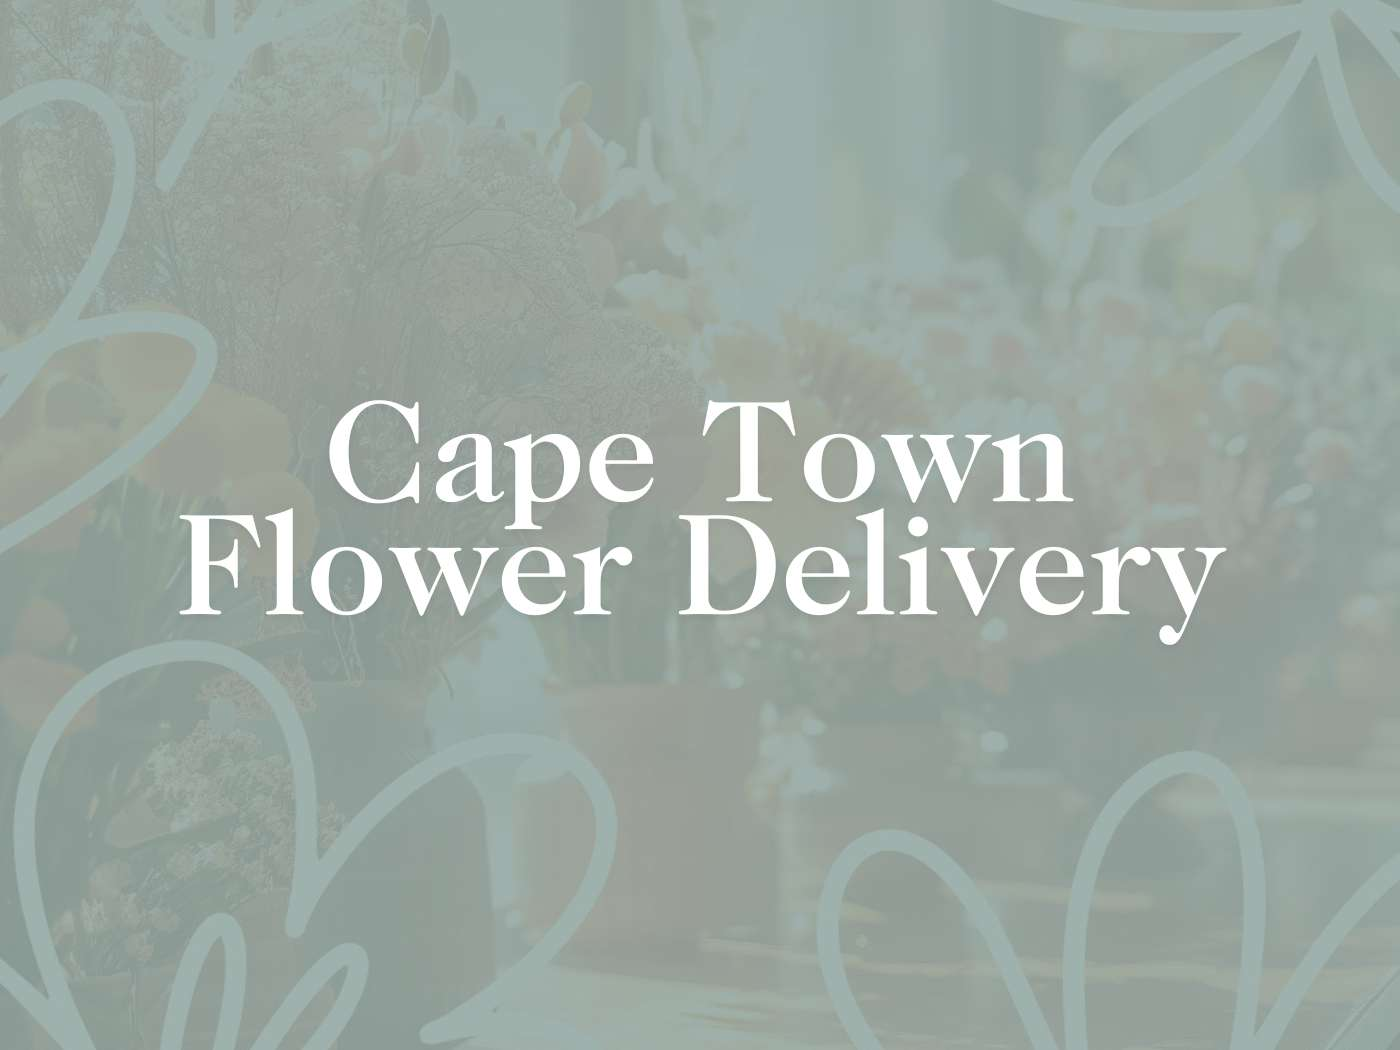 Elegant text 'Cape Town Flower Delivery' set against a background with floral motifs, representing the dedicated delivery service provided by Fabulous Flowers and Gifts.